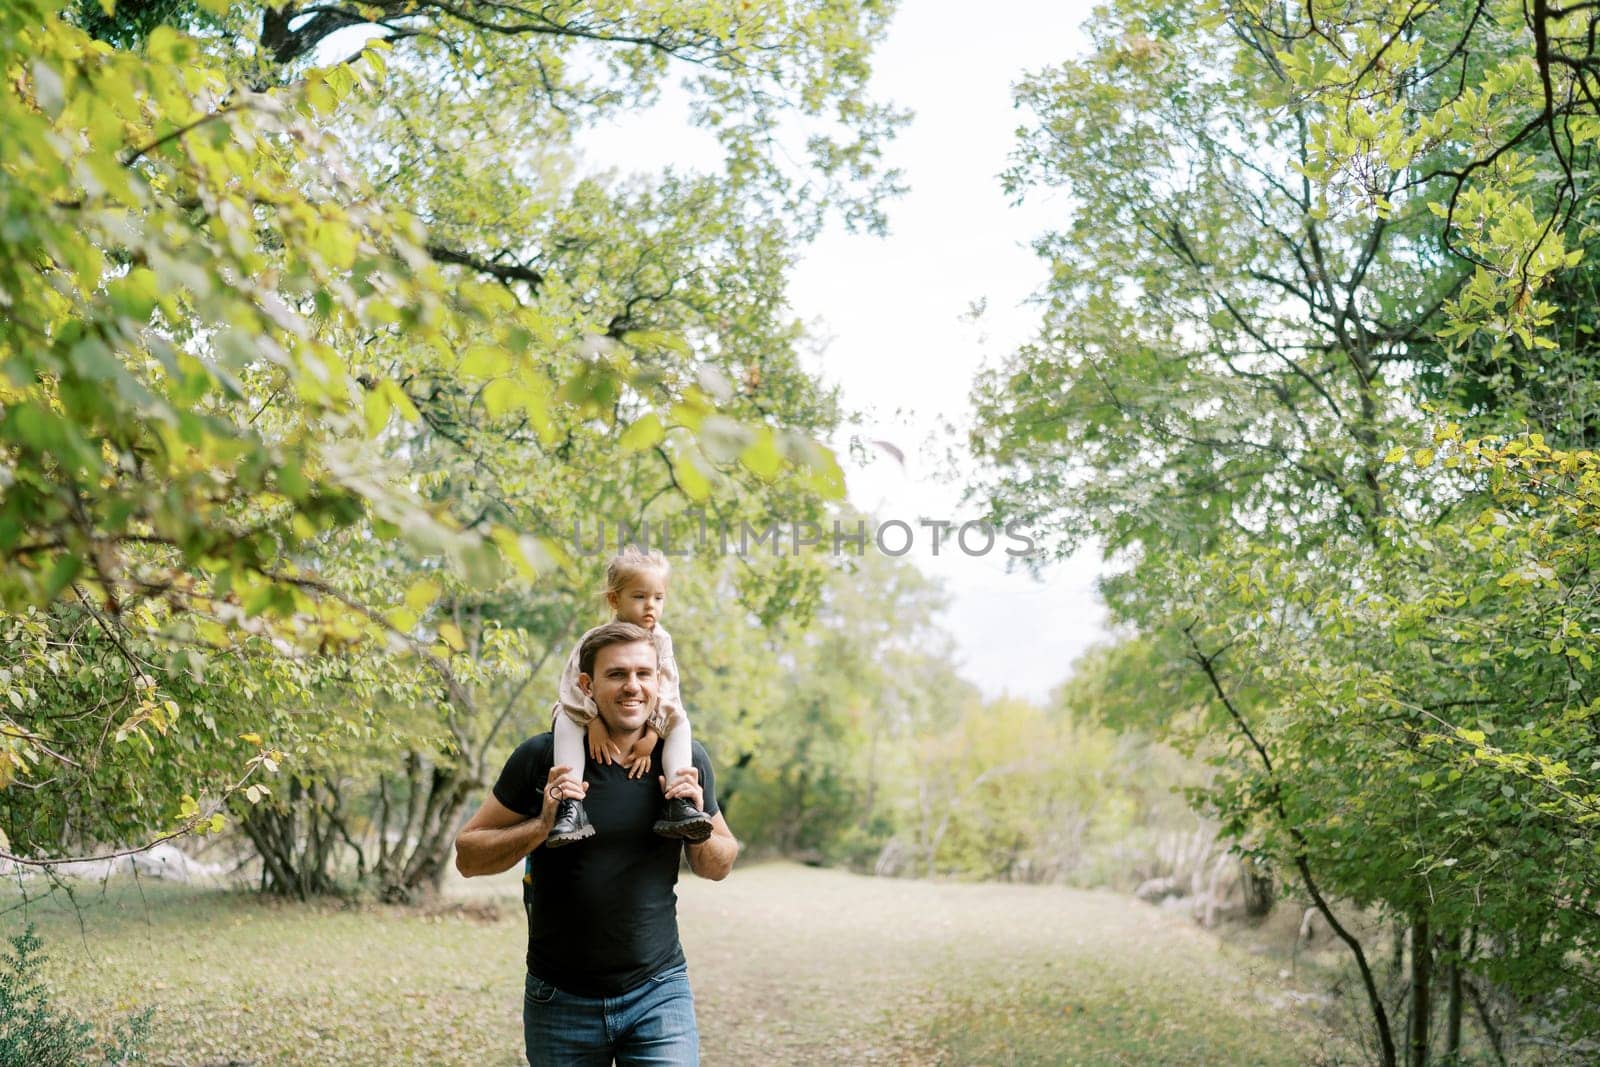 Smiling dad with a little girl on his shoulders walks through a green forest. High quality photo